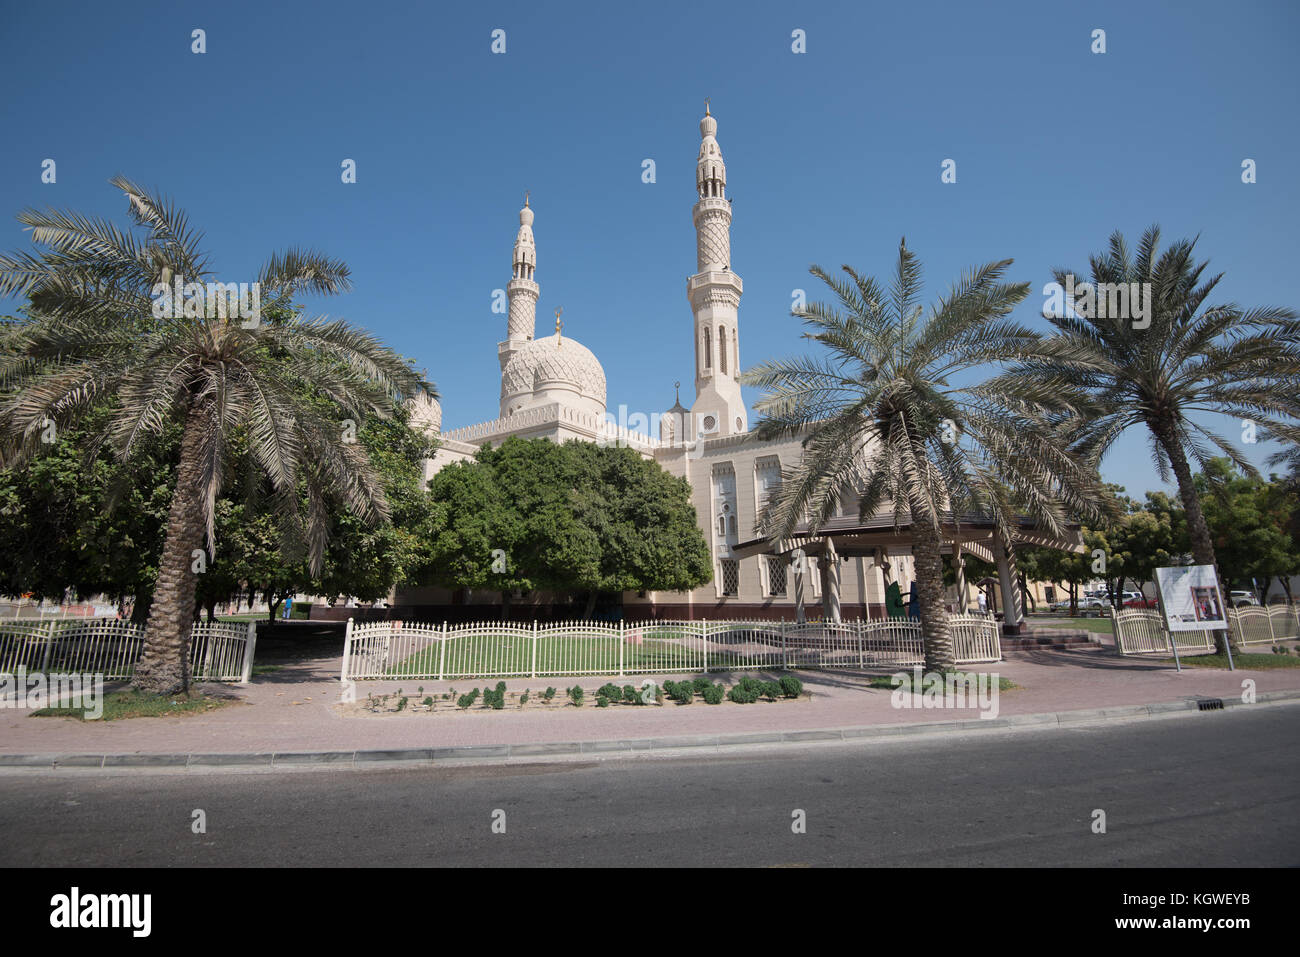 DUBAI, UAE - 29OCT2017: Jumeriah Mosque is one of the main mosques in Dubai and one of few that operates tors for non-believers. Stock Photo